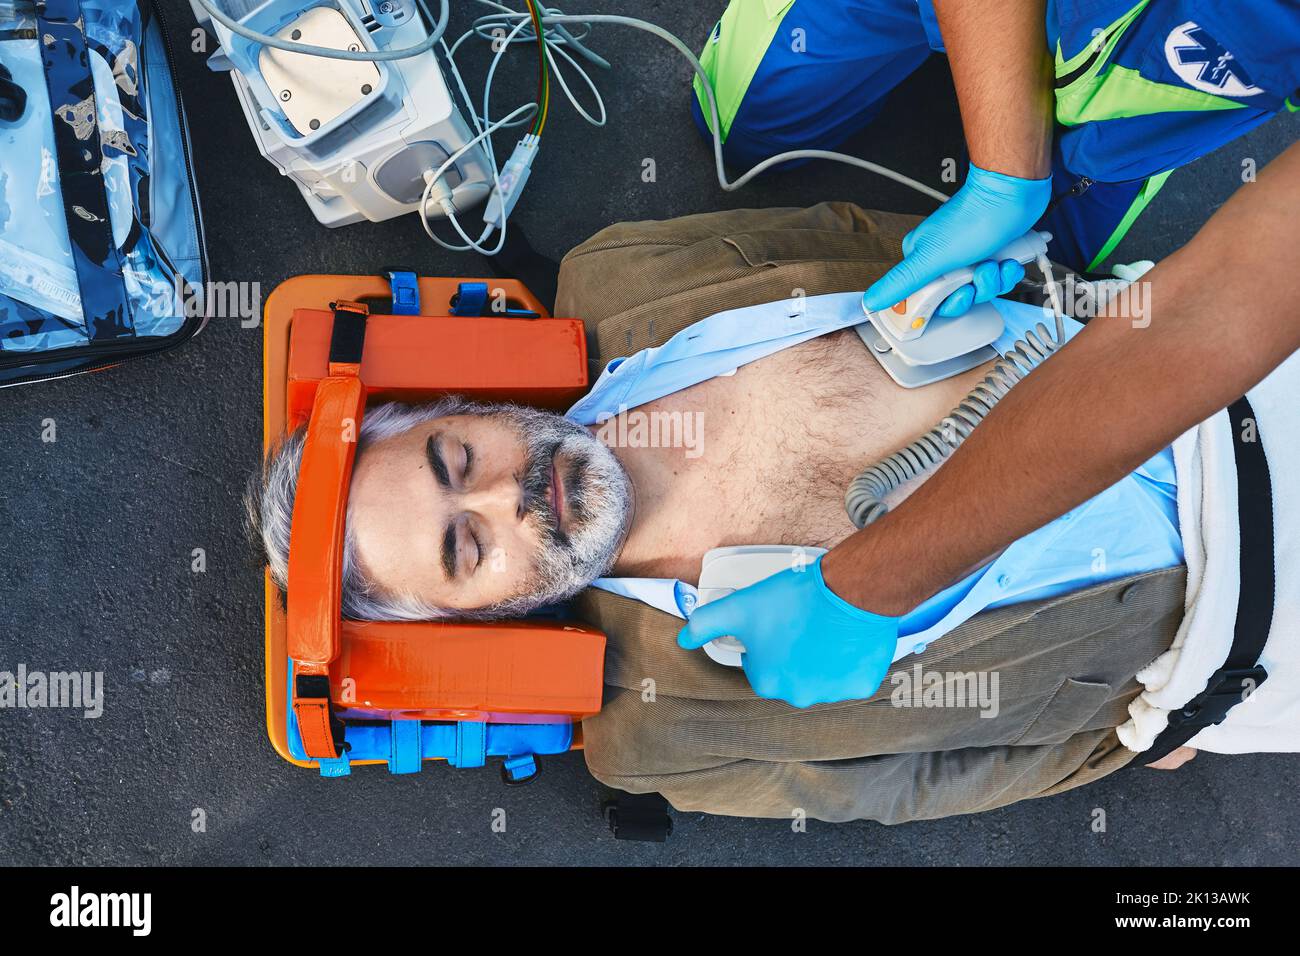 Ambulance paramedic using defibrillator performing cardiopulmonary resuscitation on casualty. First aid for injured mature man lying on emergency stre Stock Photo